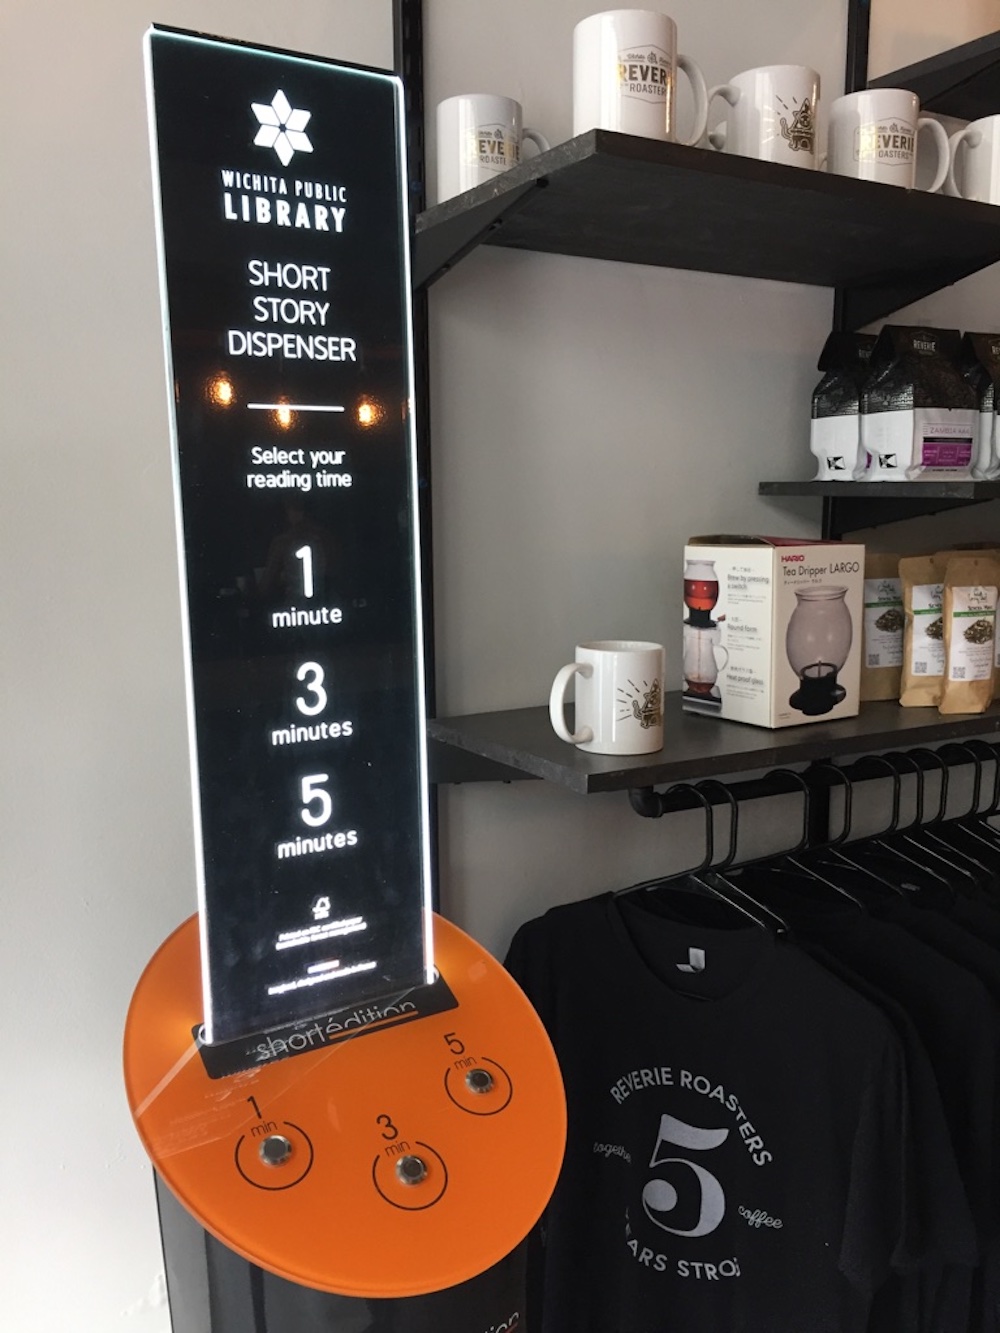 Short story machine from the Wichita Public Library at Reverie Roasters in Wichita, Kansas